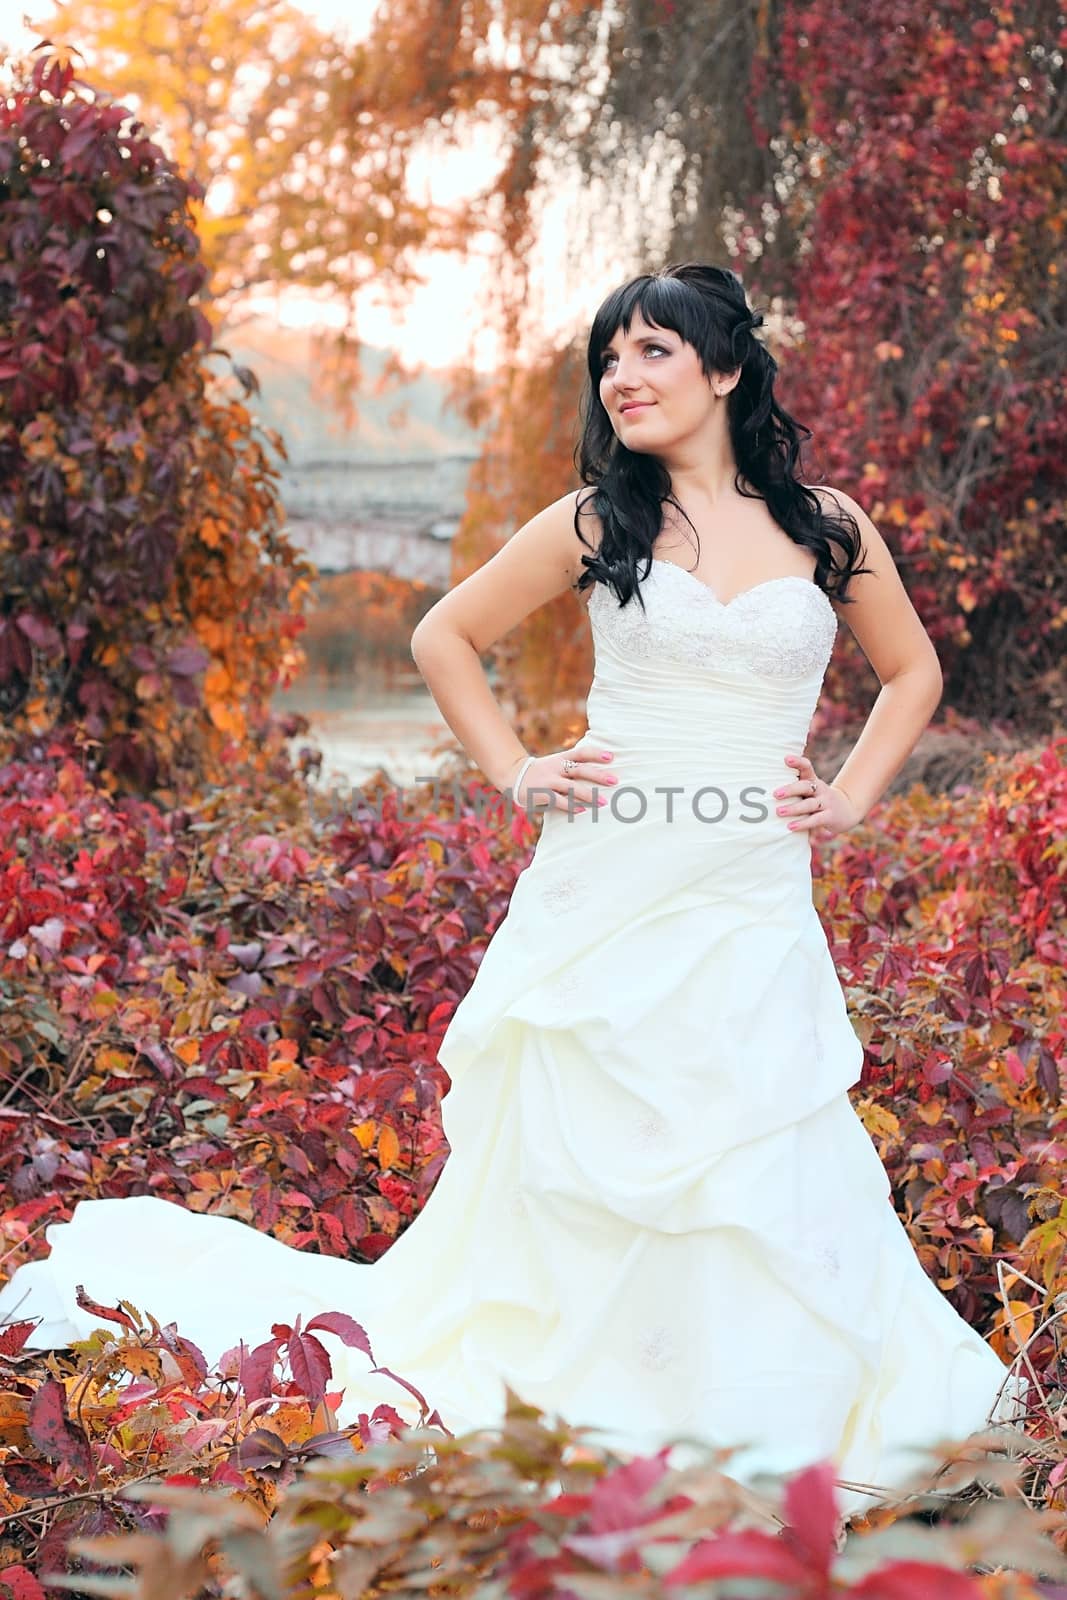 Girl in a weeding dress in a park among green and red leaves